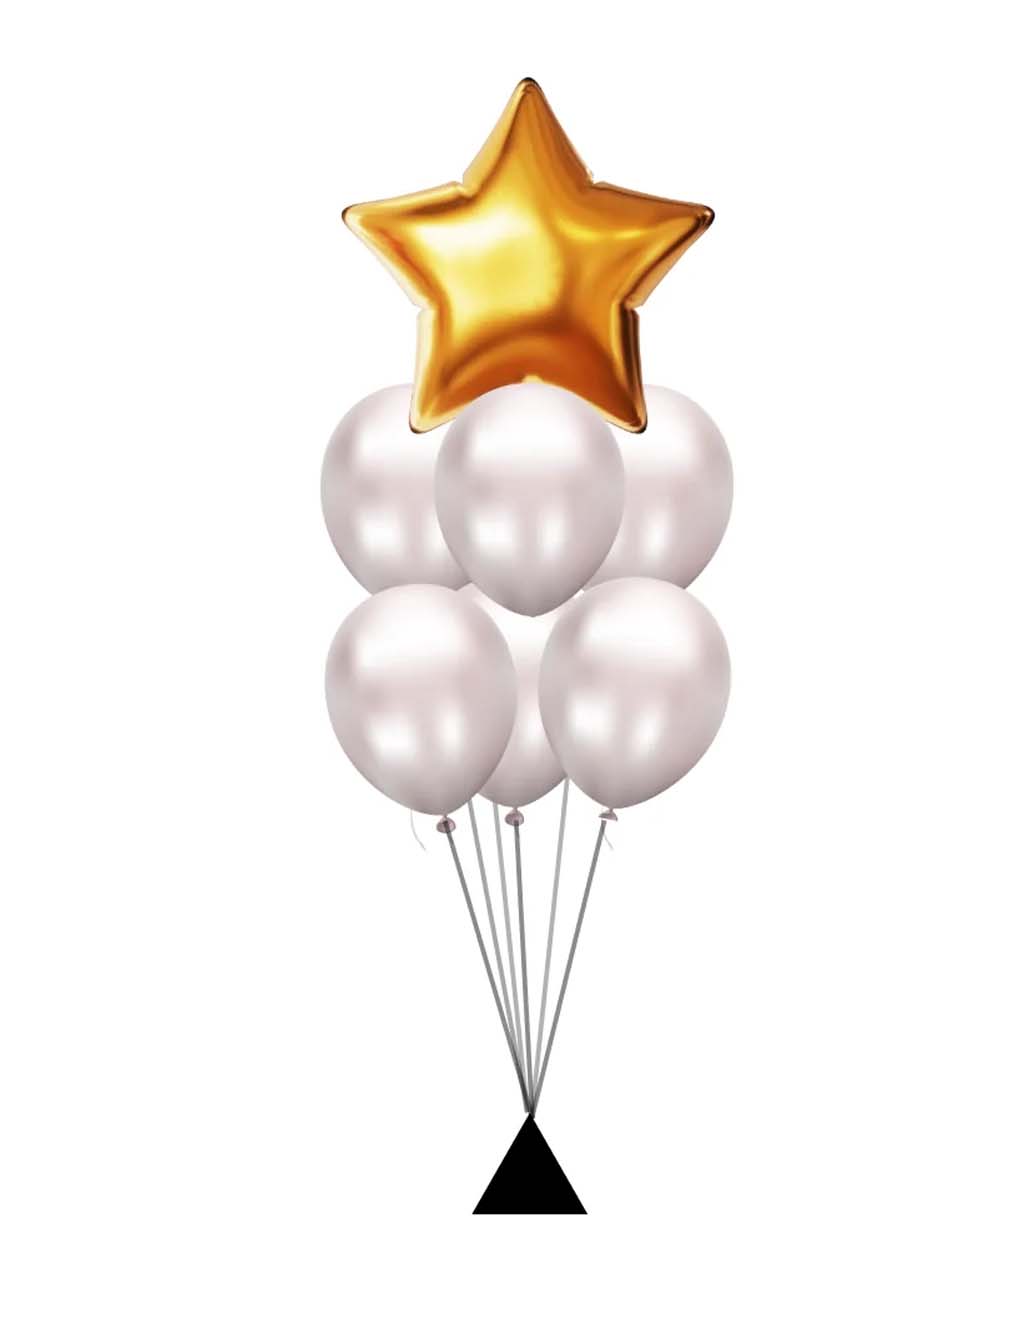 6 Latex balloon bouquet with mylar star topper